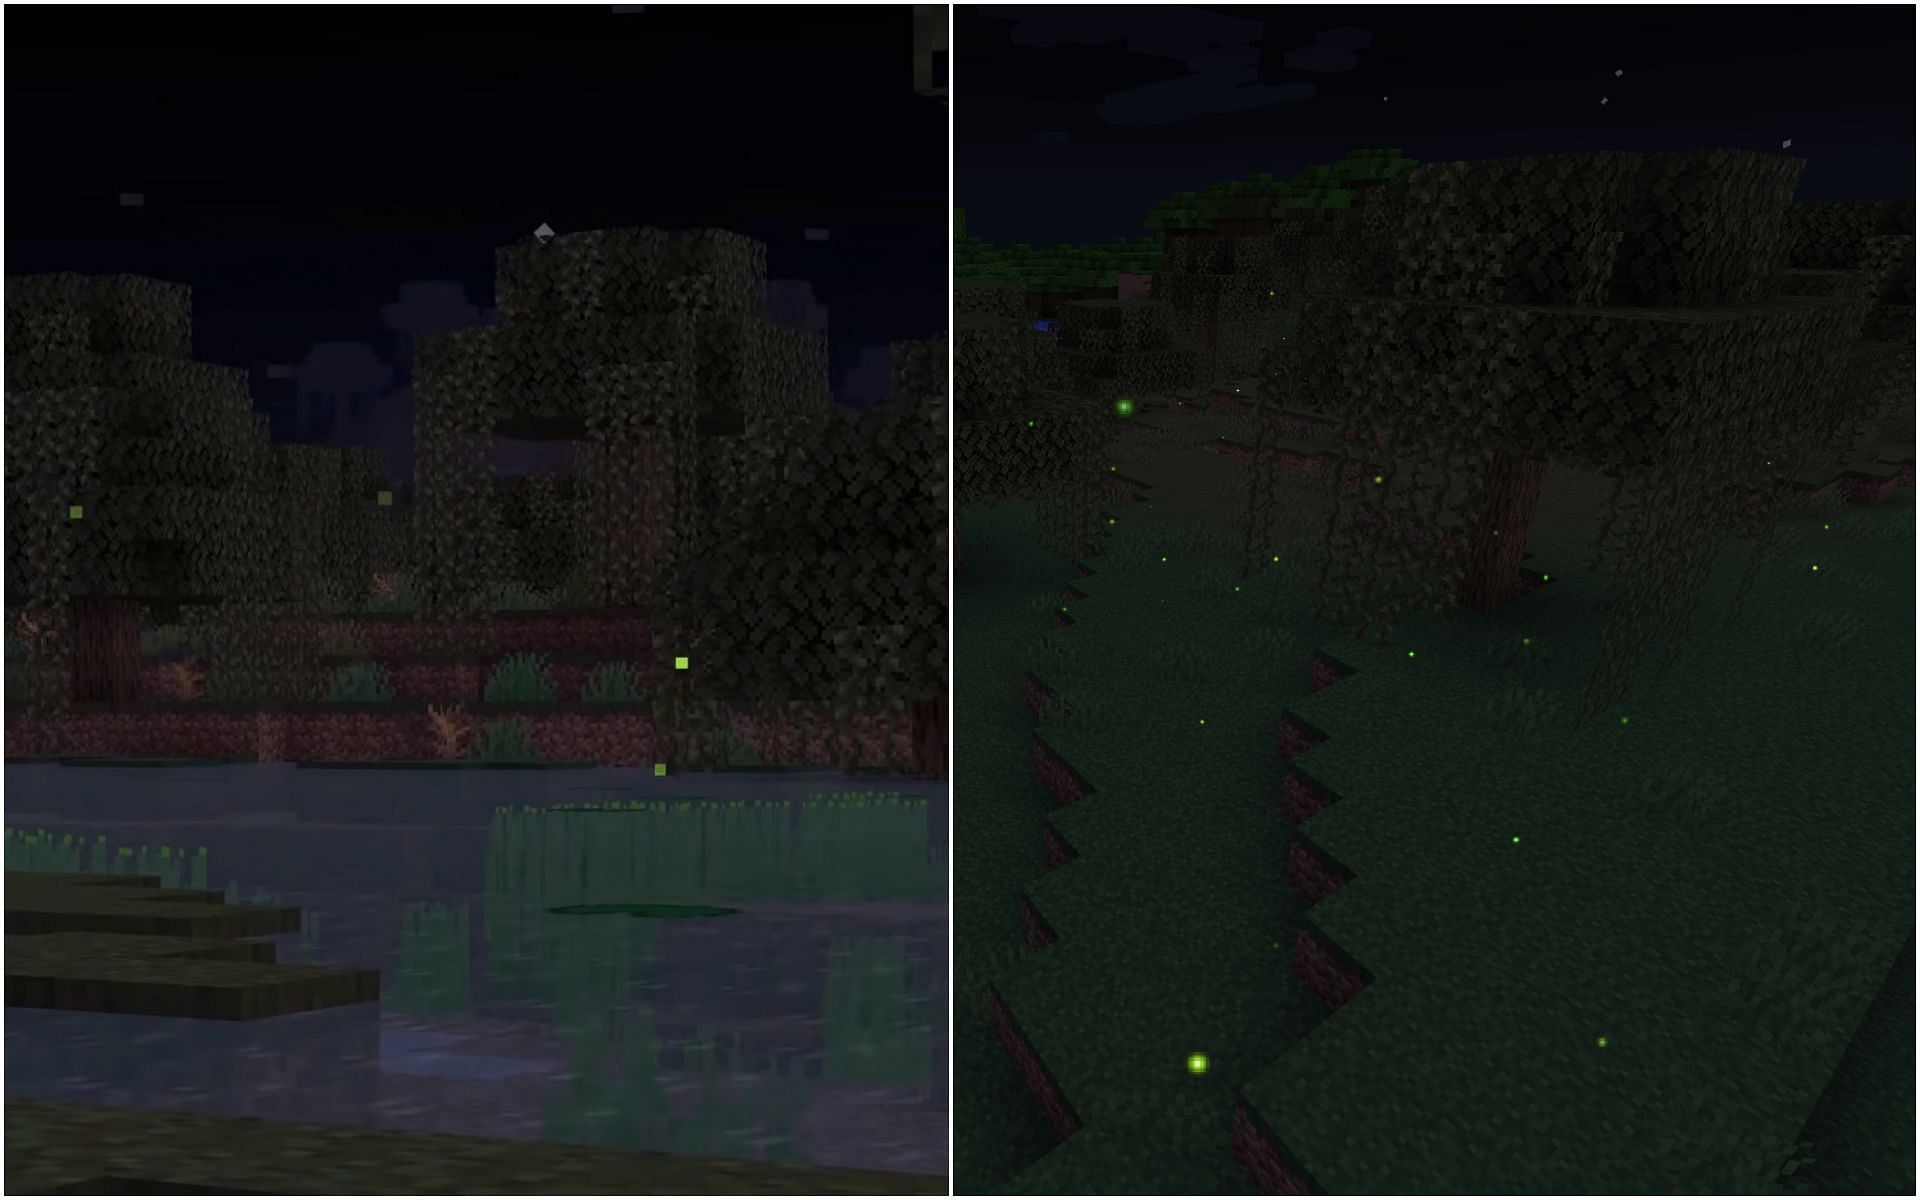 How to get Birch Forest and Fireflies custom mod for Minecraft?